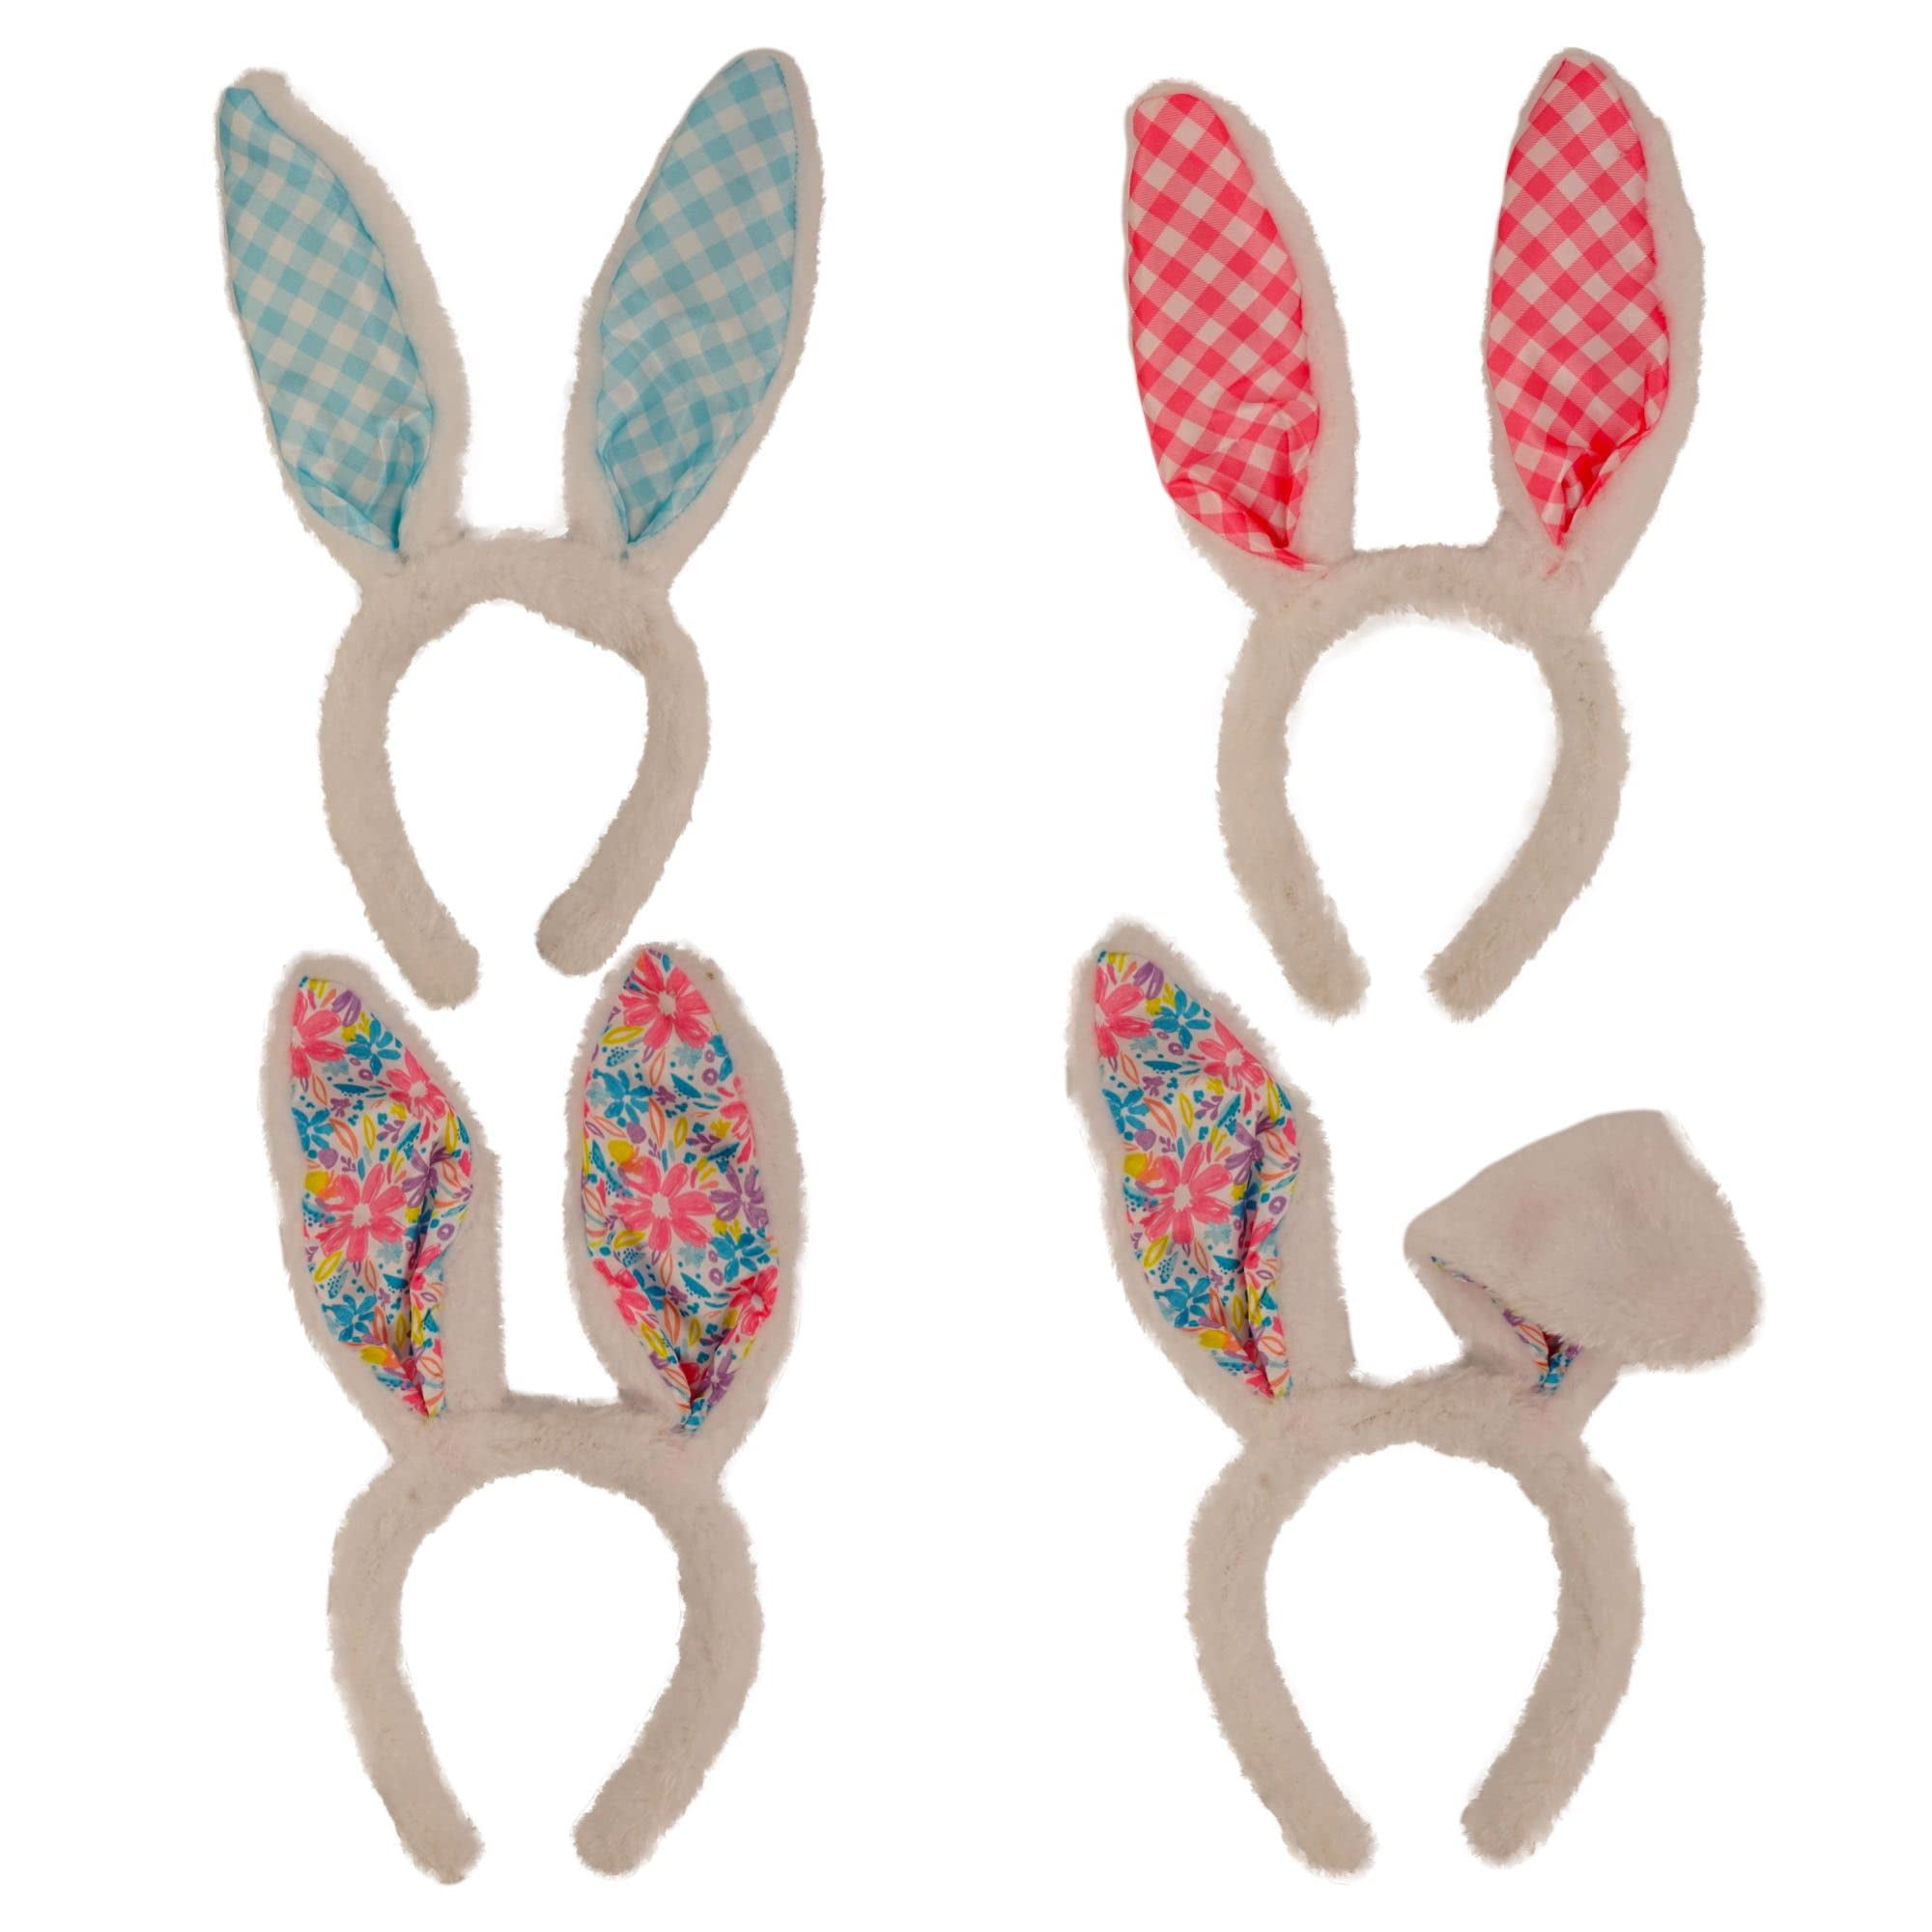 Way to Celebrate! 9.5 inch Brown Easter Bunny Ear Headband Set 